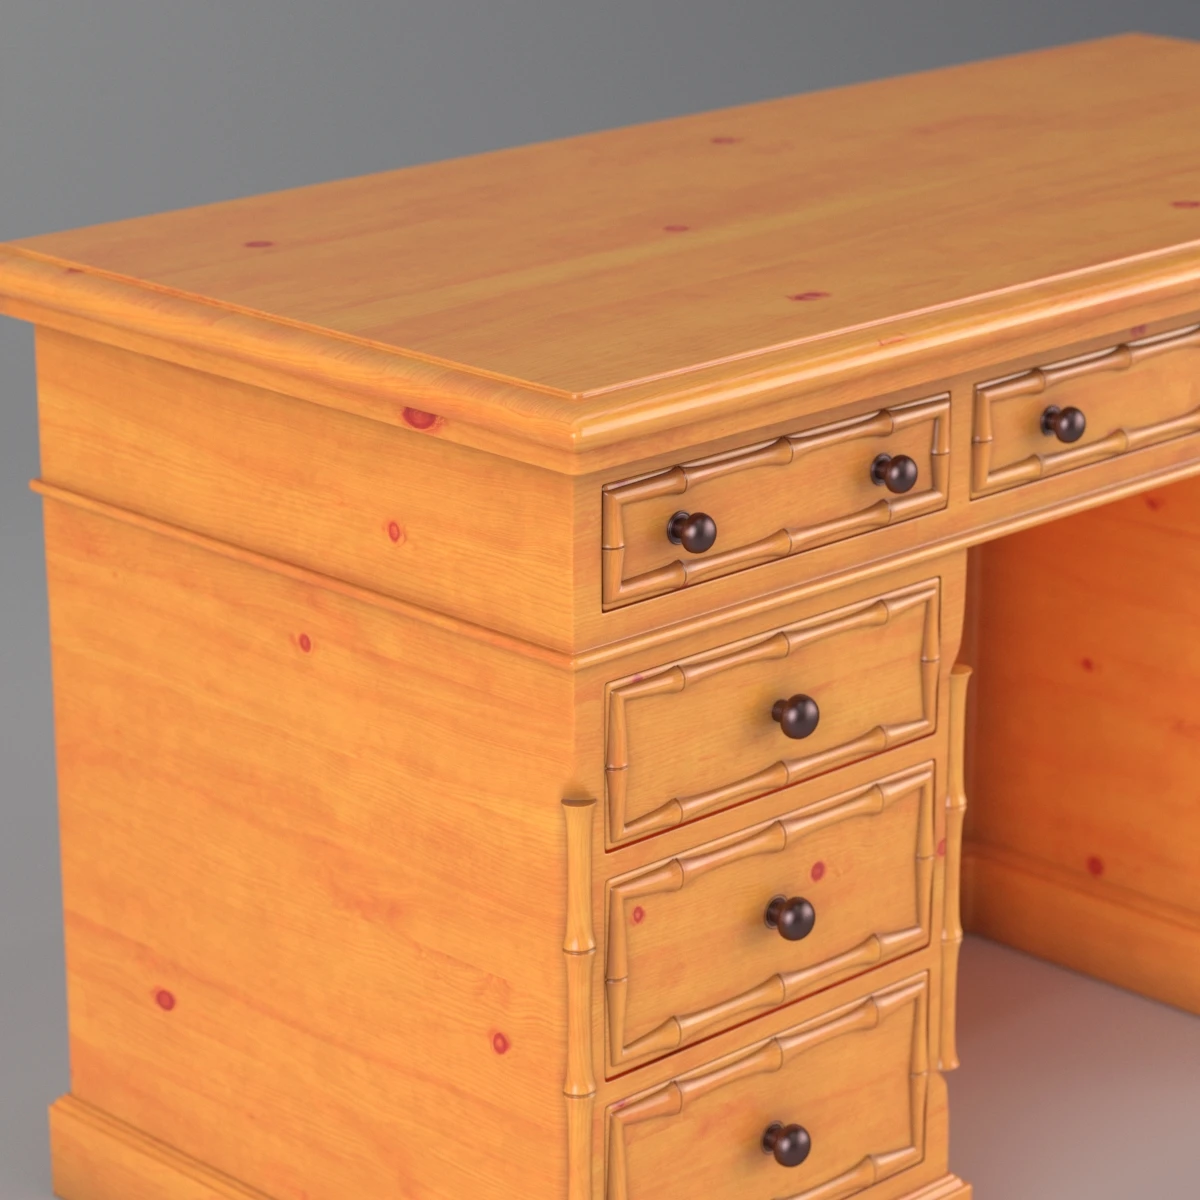 1920s Pine Faux Bamboo Painted Knee Hole Desk 3D Model_06